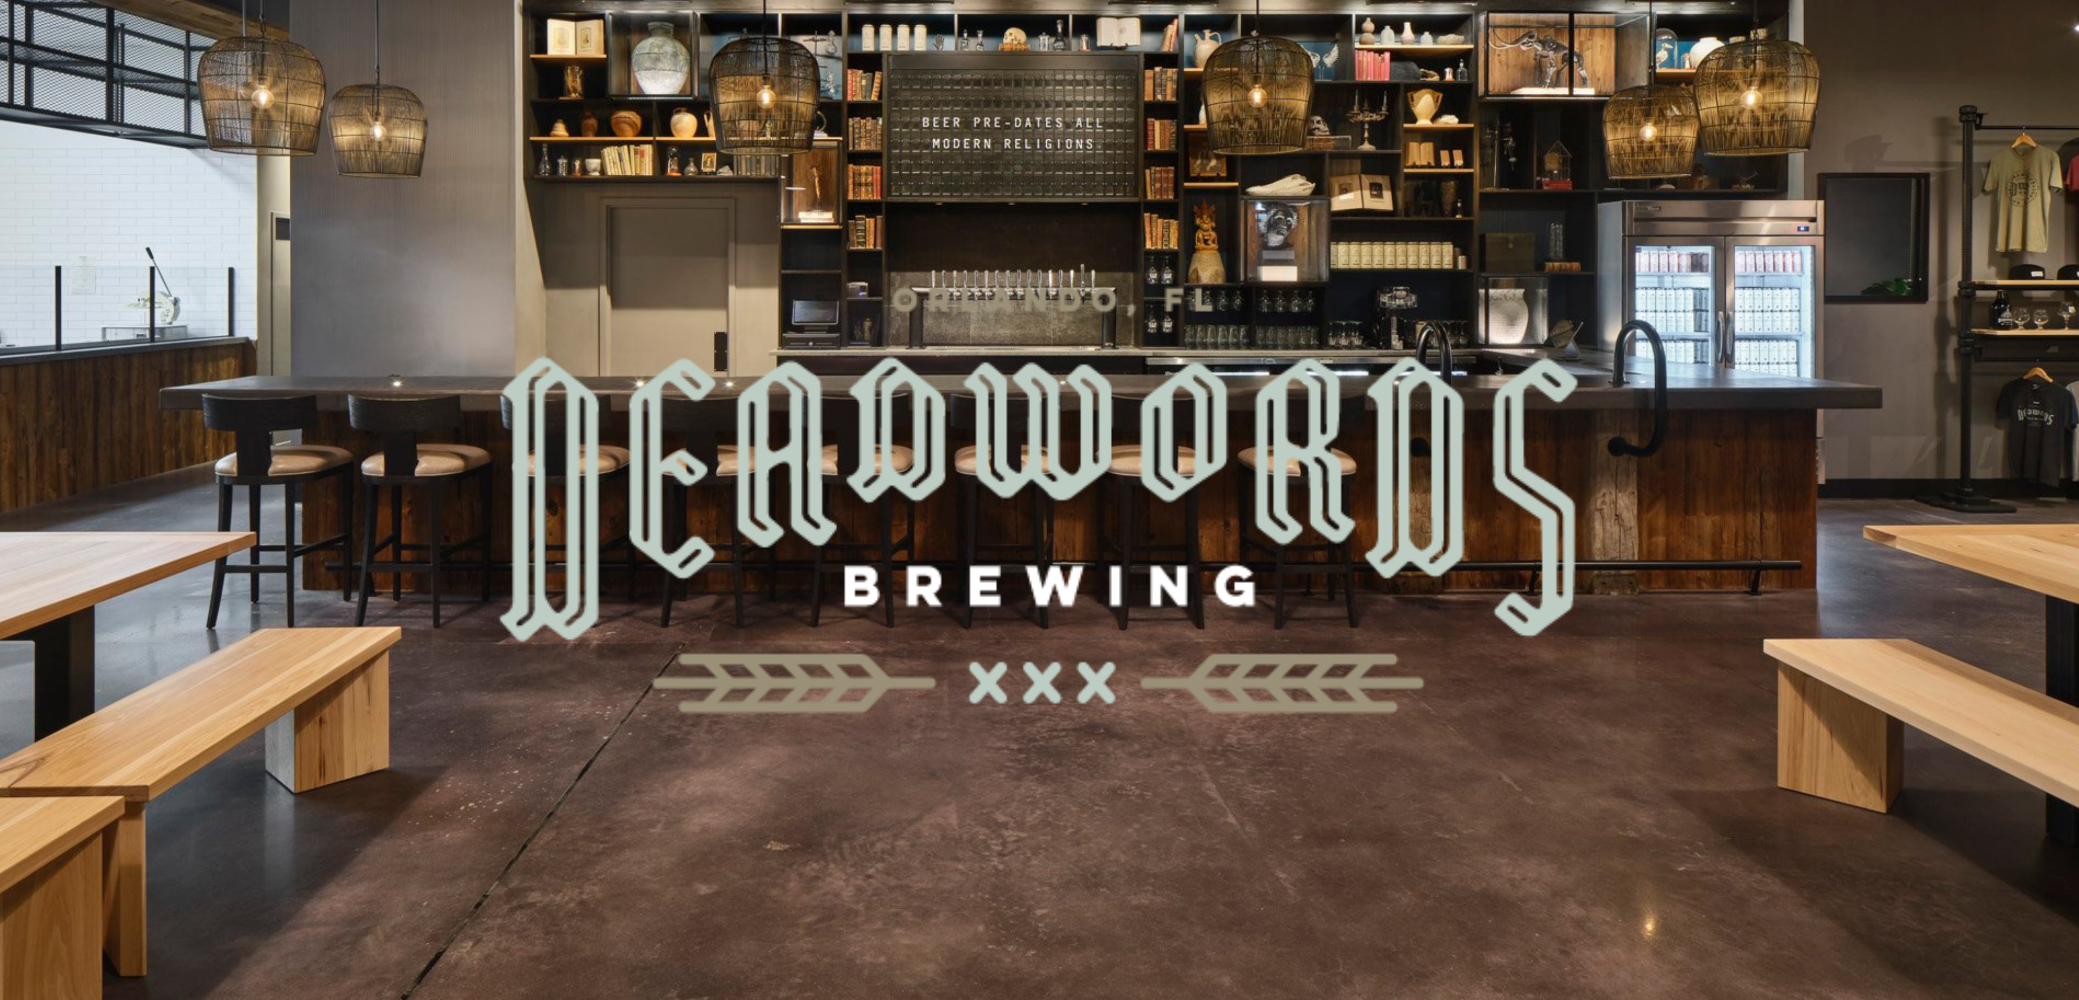 Deadwords Brewing Co: Available Turnkey Prior to Auction: PKW 15 BBL Microbrewery w/ PKW 2 BBL Pilot System, Fermenters, Brites, Chiller, Boiler